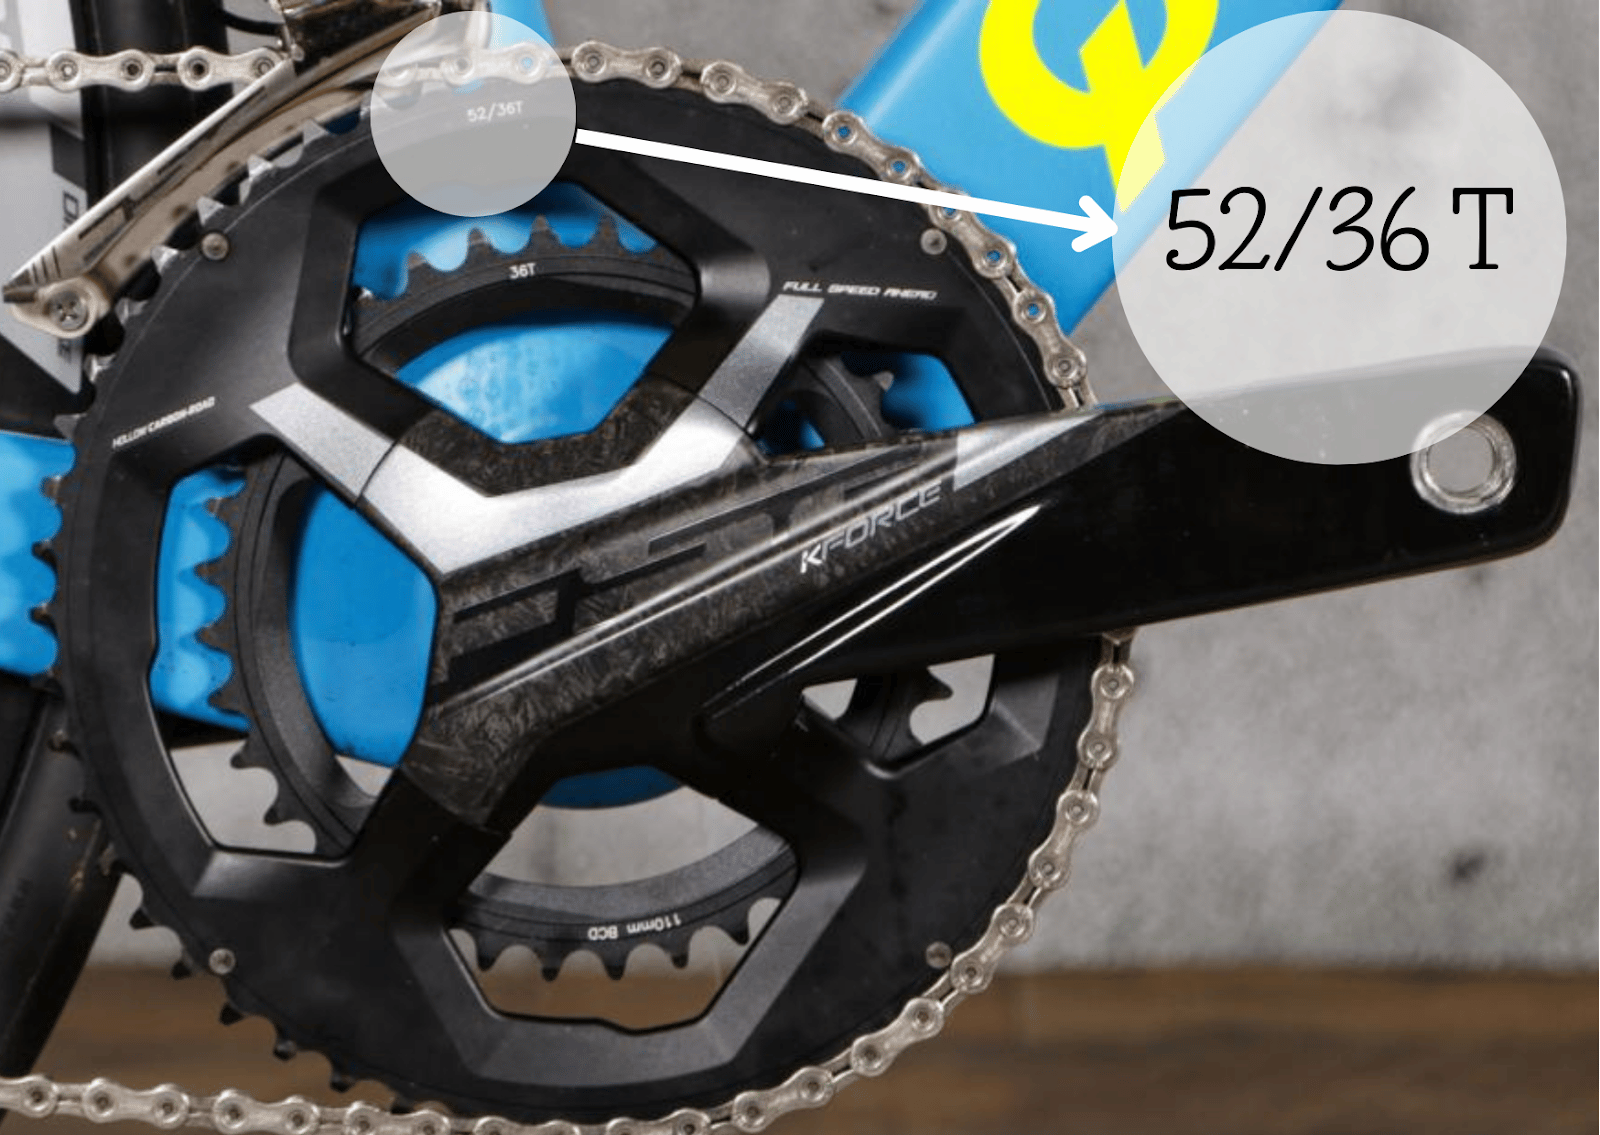 Check to see how many teeth your chainring has by looking at the figure on the side of the chainring itself, or by physically counting the teeth.